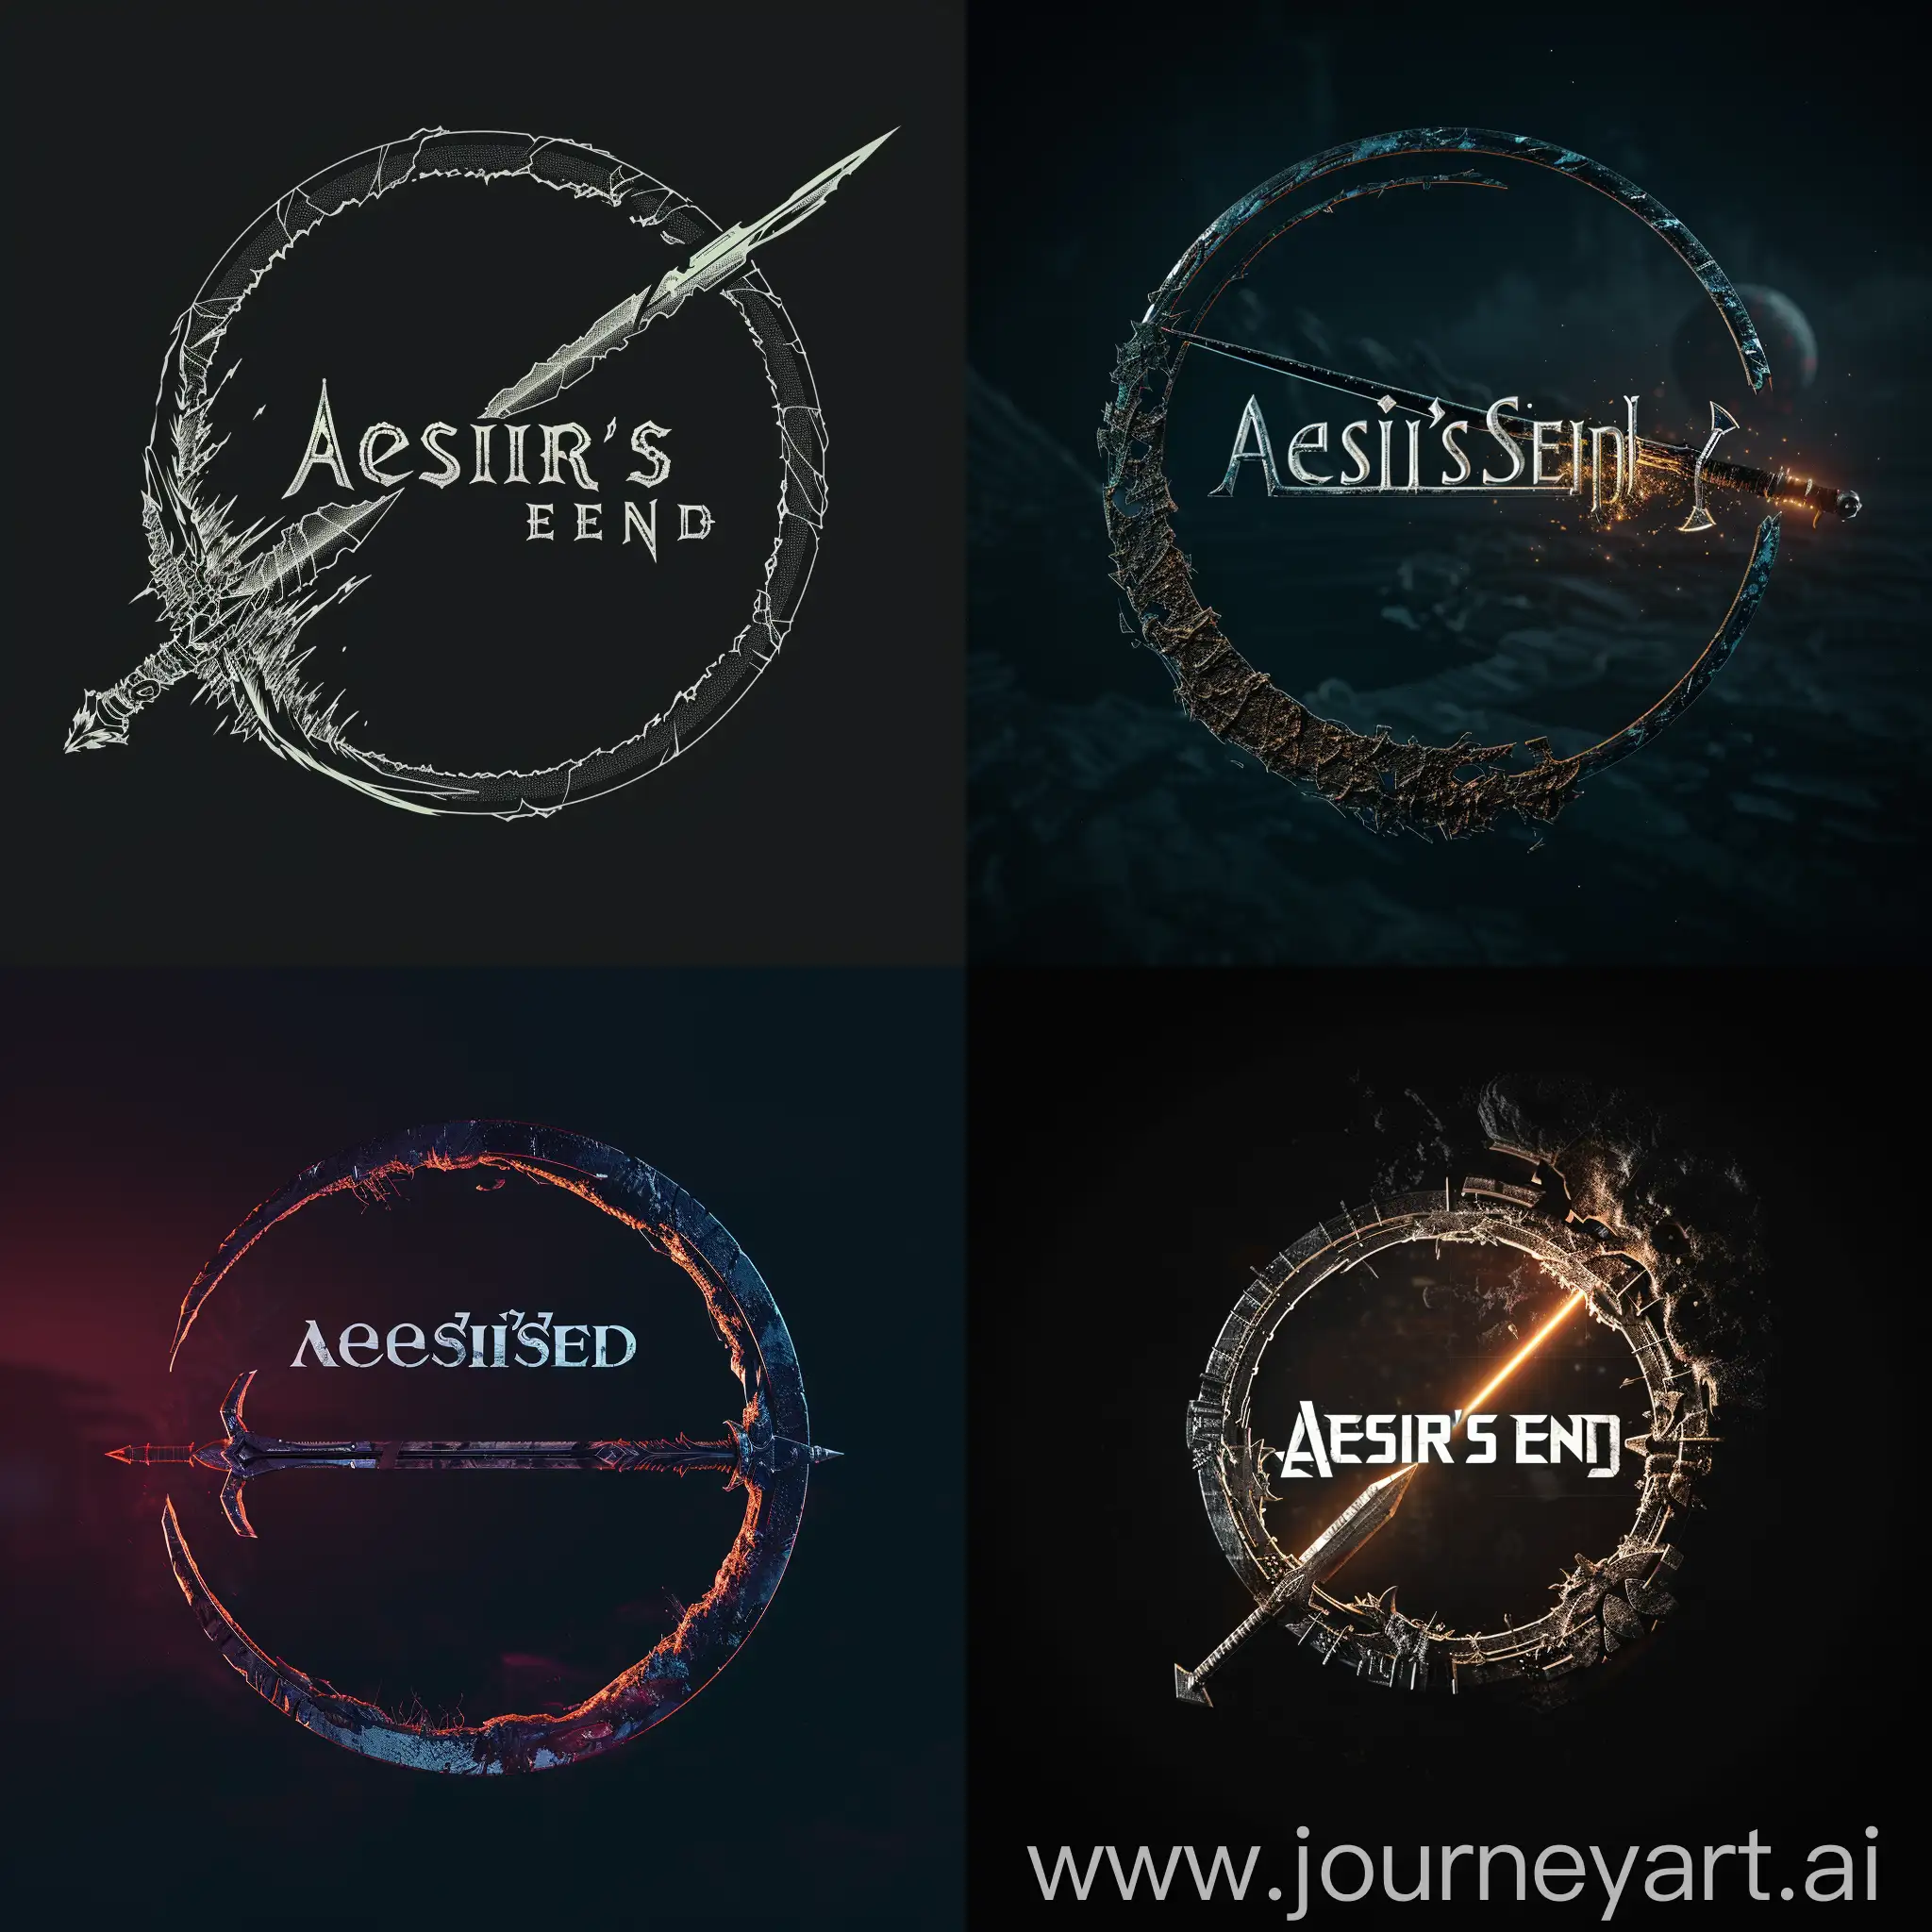 Come up with a logo for an FPS videogame about killing Nordic gods, called "Aesir's End". be inspired by the FALLOUT videogame franchise logo or the Elder Scrolls videogame Logo. Have a futuristic viking sword go through the text, and the bottom of the circle should be deteriorating.